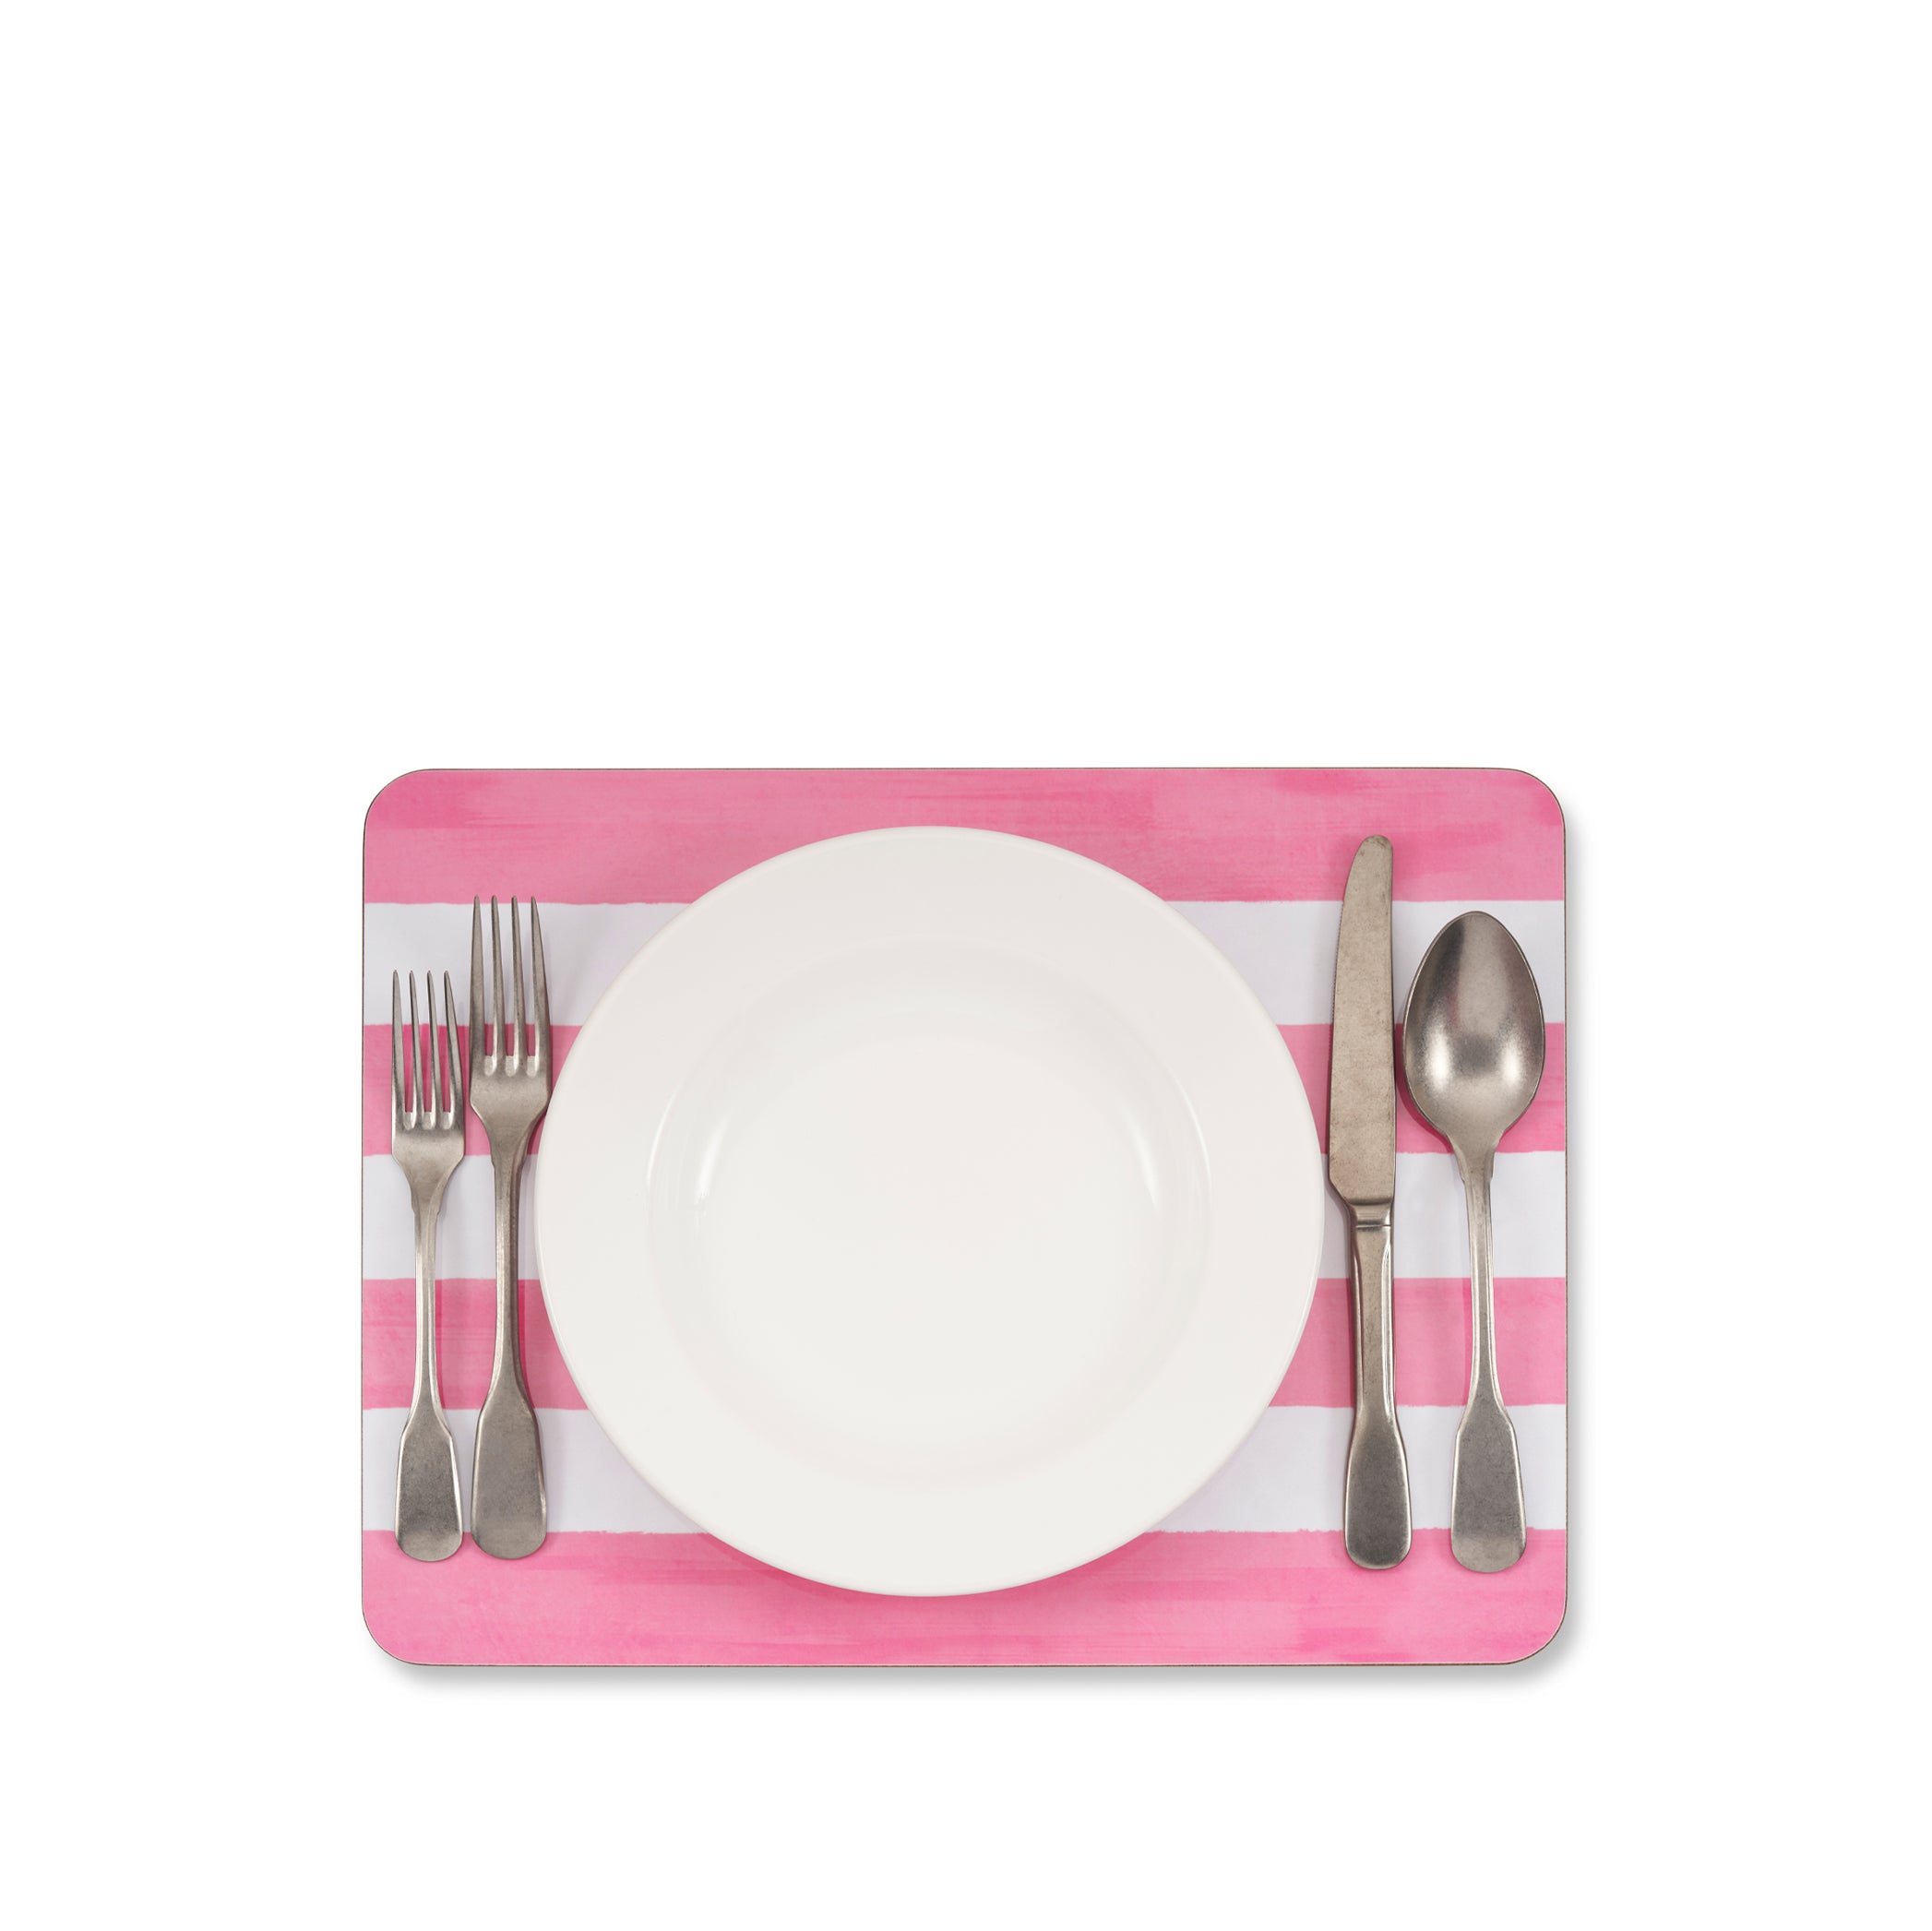 Stripe Cork-Backed Placemat in Rose Pink